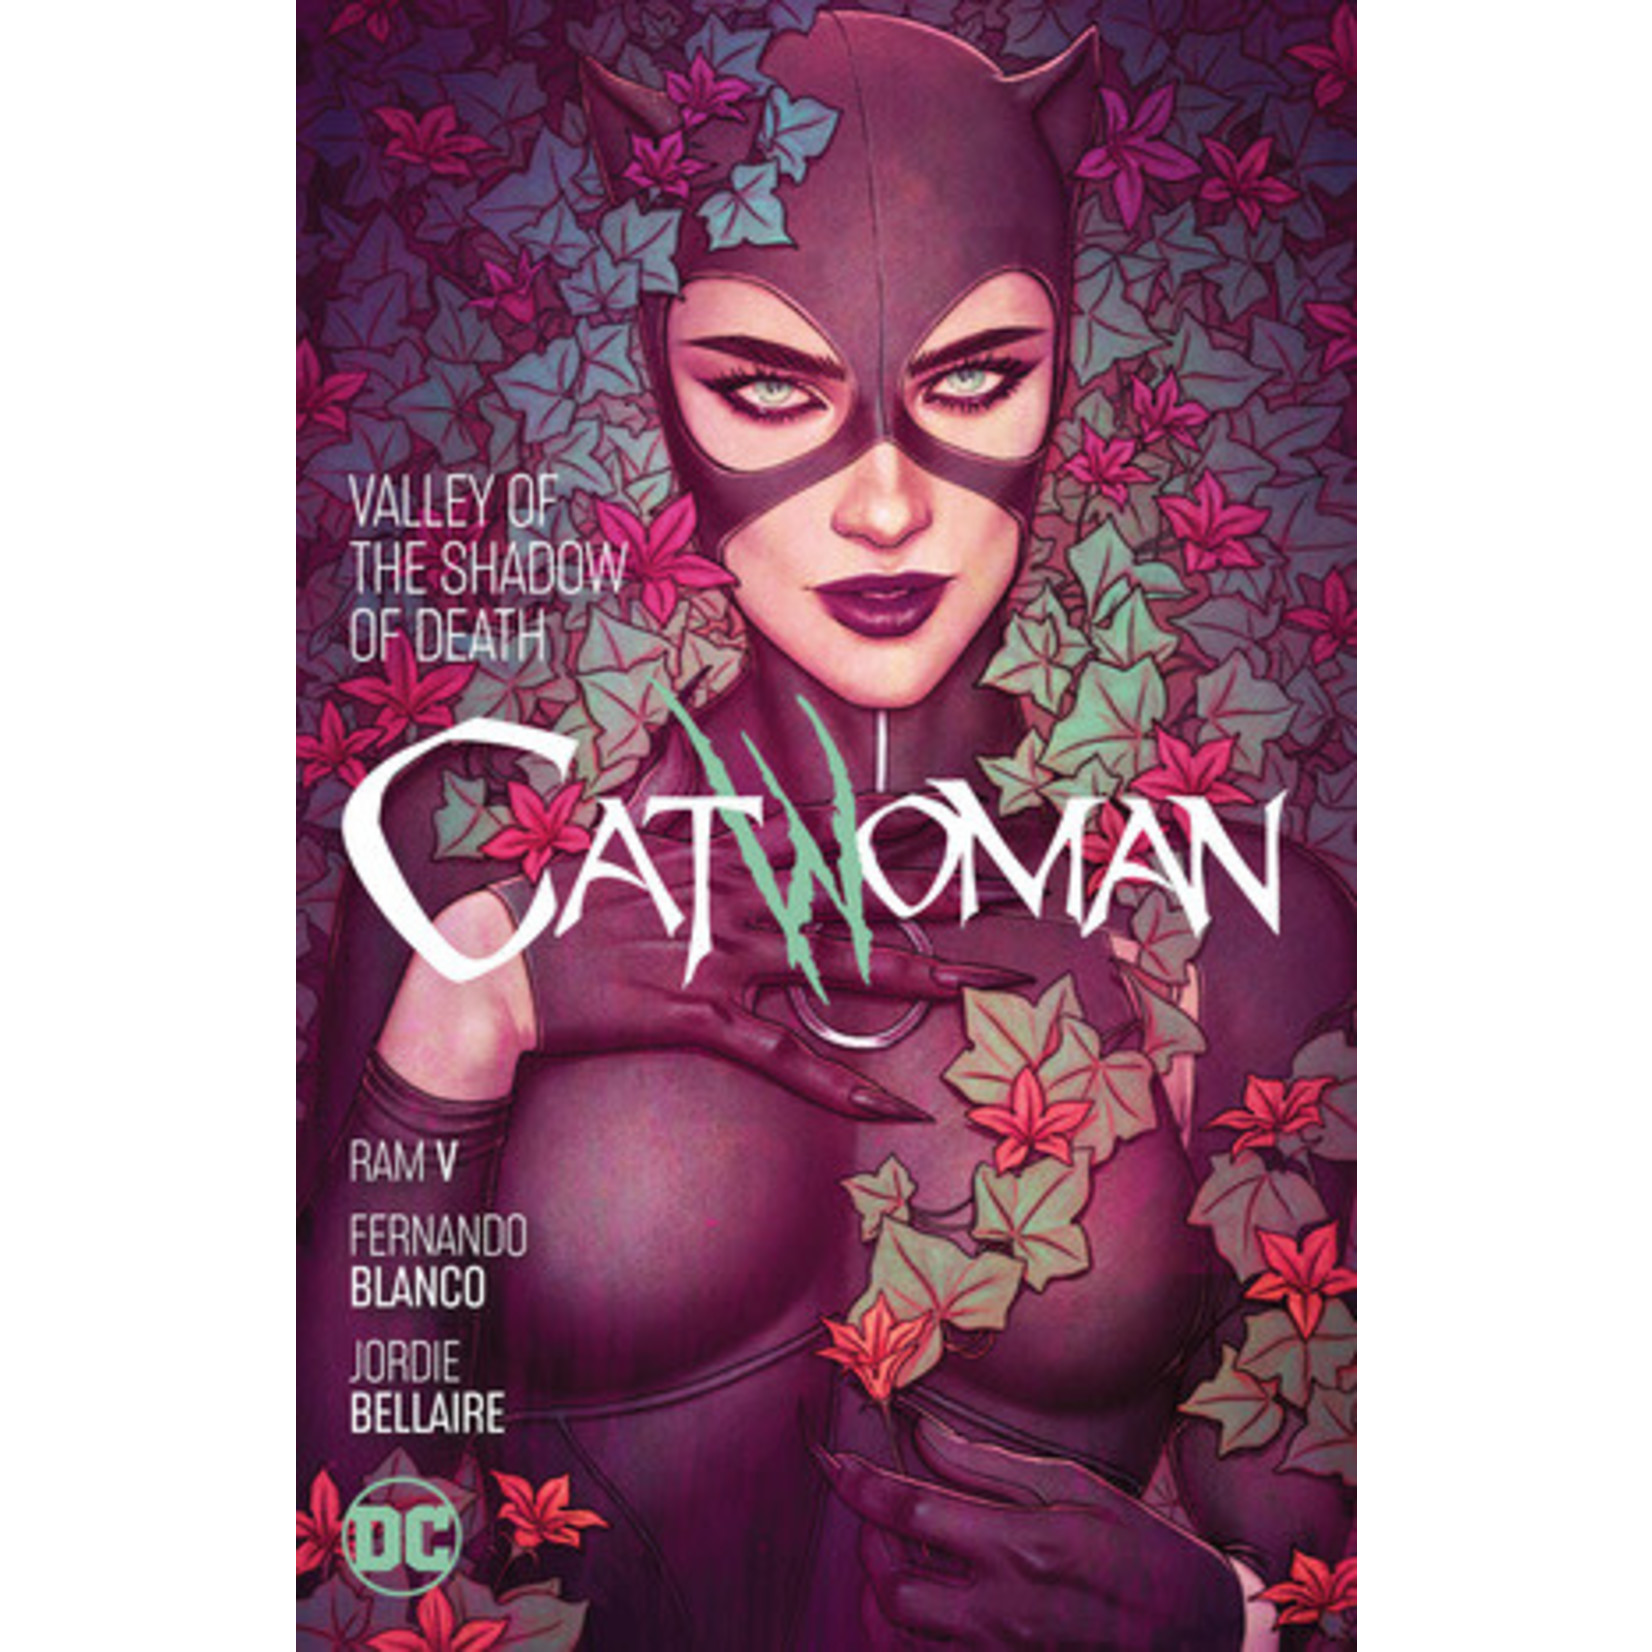 DC Comics Catwoman Vol. 5: Valley of the Shadow of Death